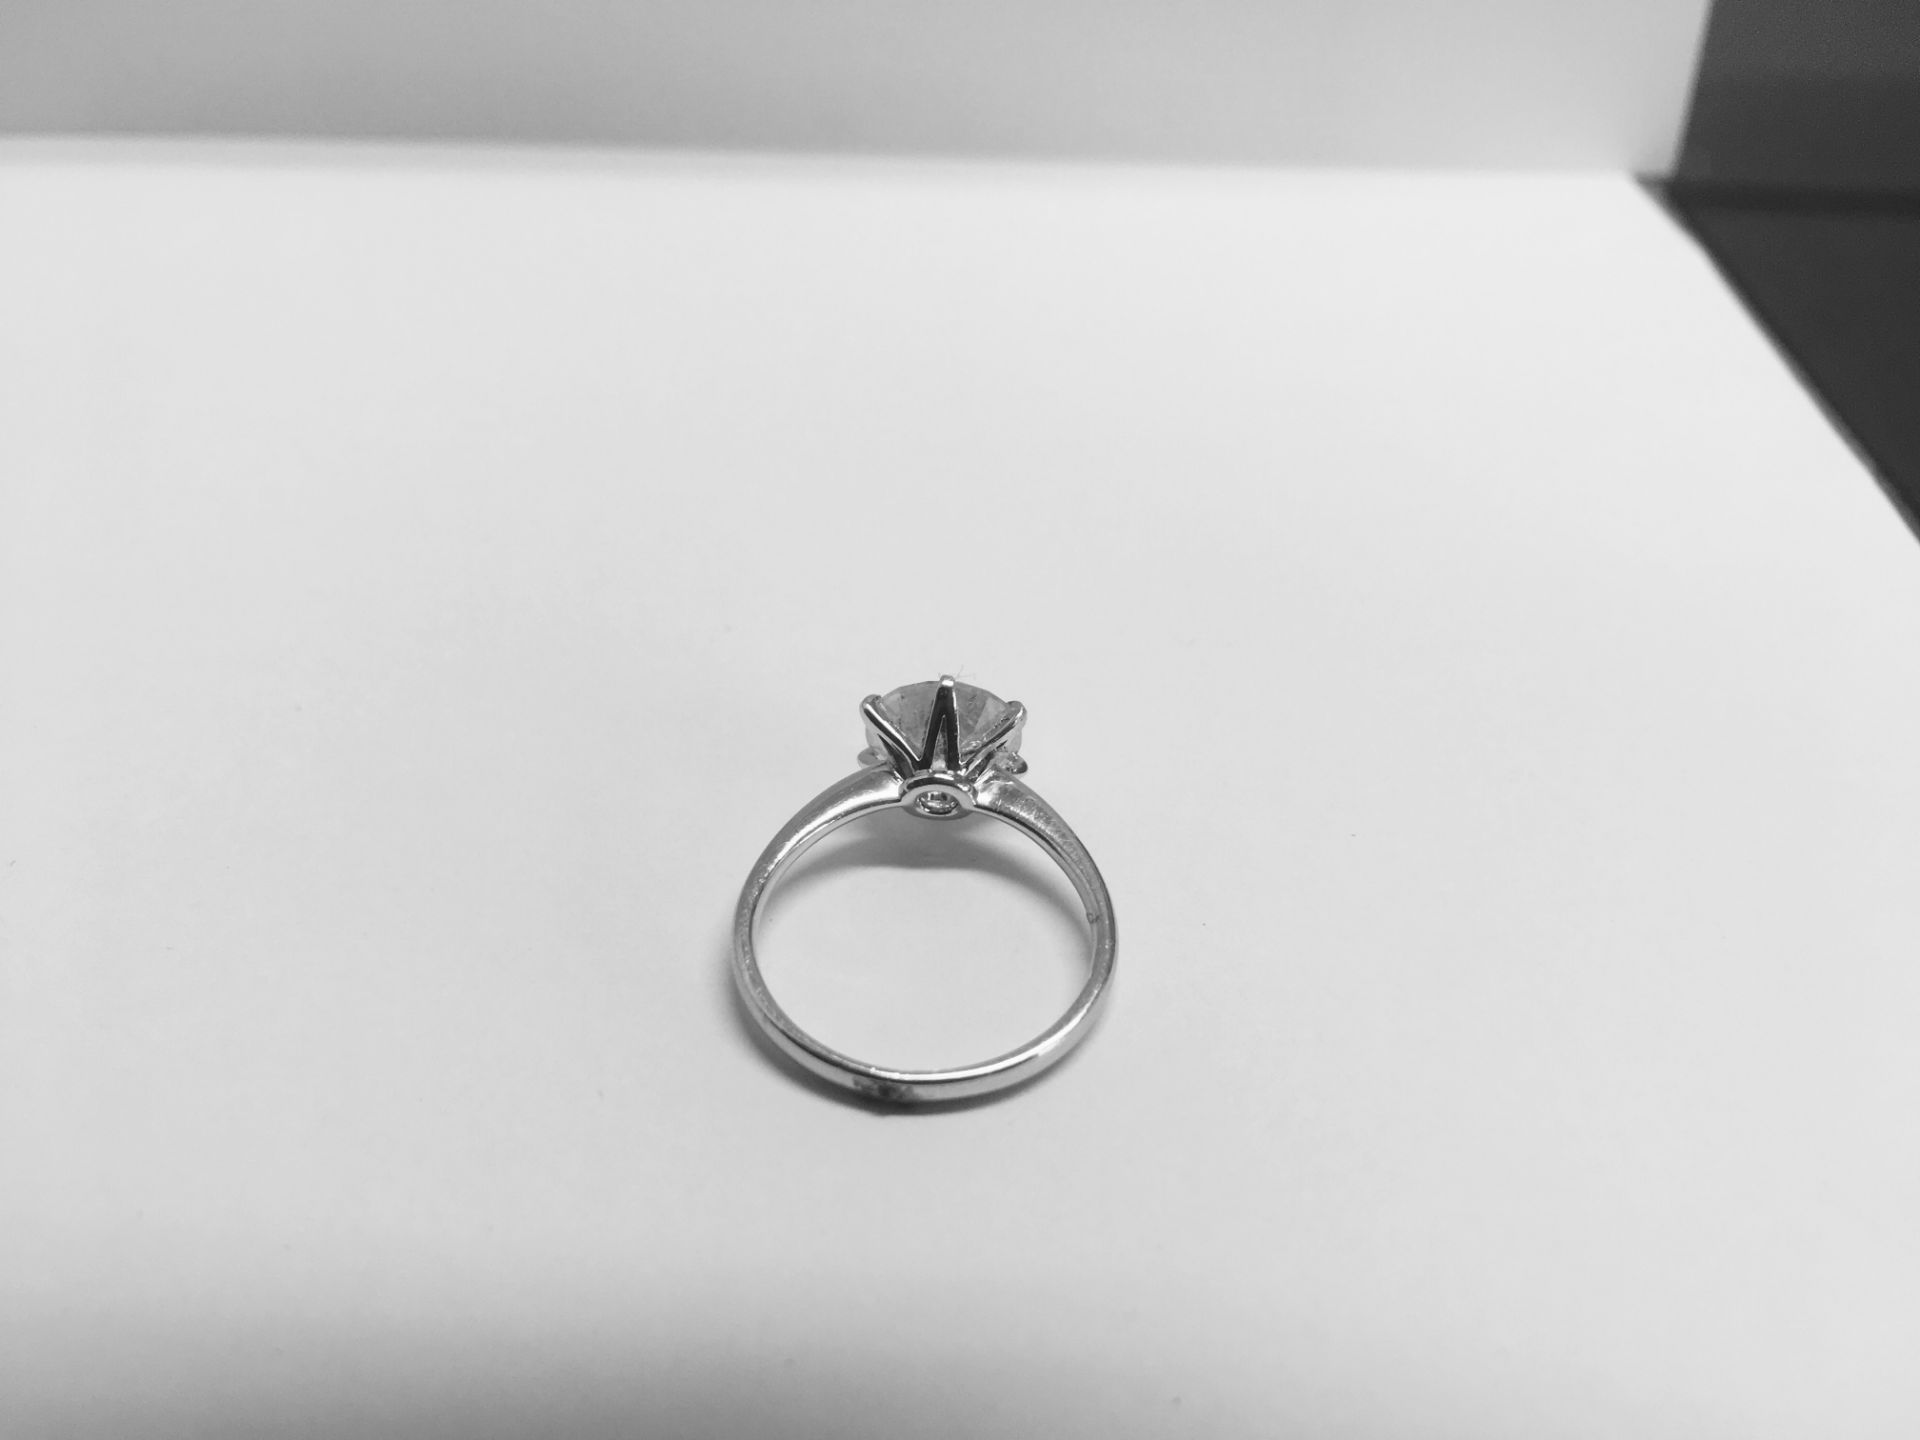 4.38ct diamond solitaire ring,h colour i1 quality (enhanced by laser drilling) diamond,5gms platinum - Image 5 of 8